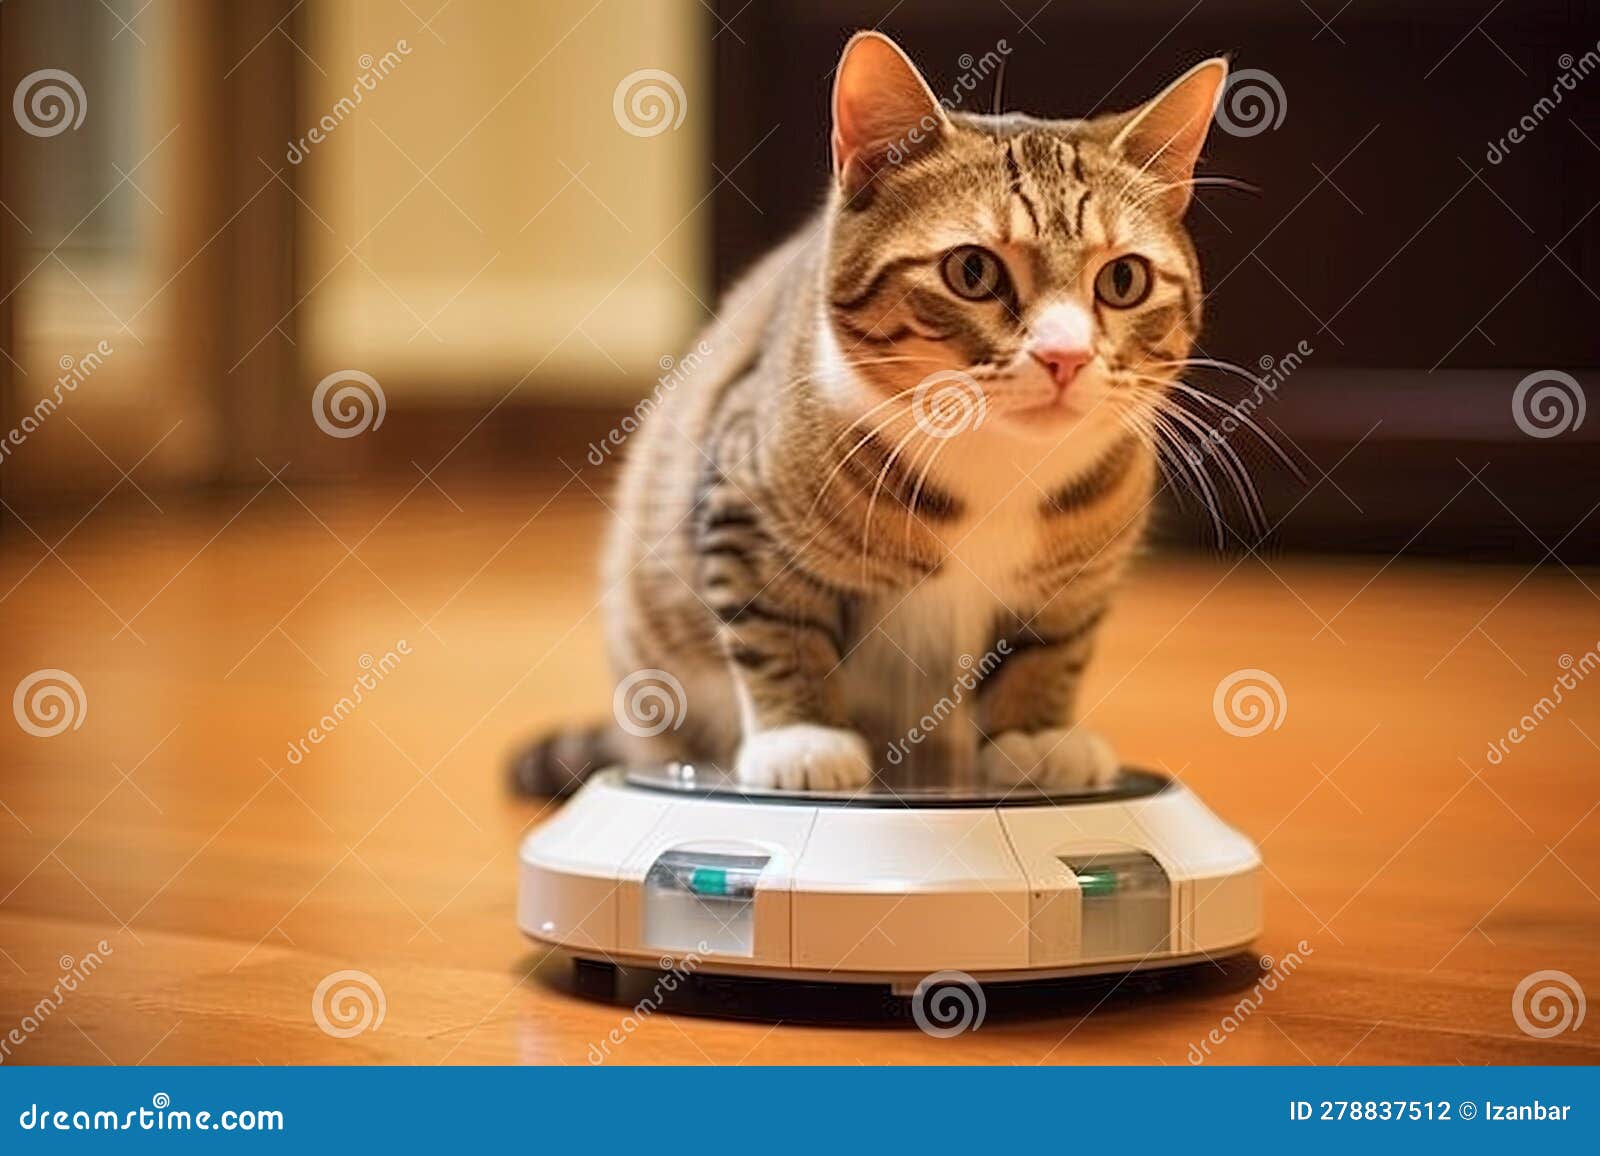 cat scientist invents a device that allows cats to communicate with humans, leading to a world where cats negotiate treat portions